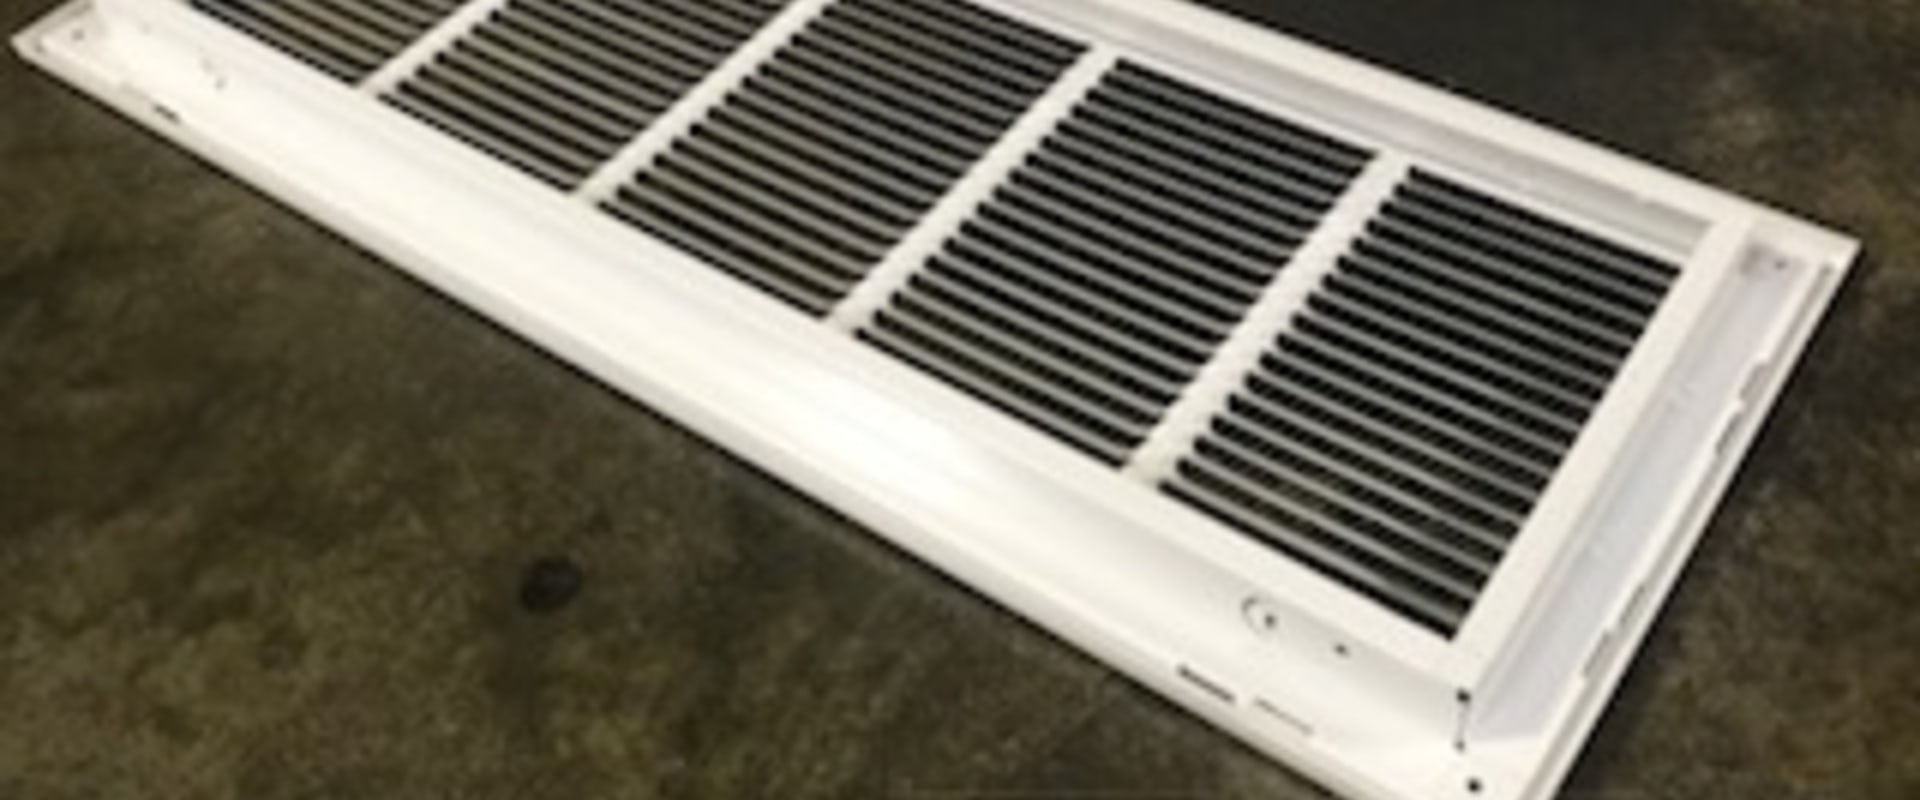 How to Choose the Right 10x30 Air Filter